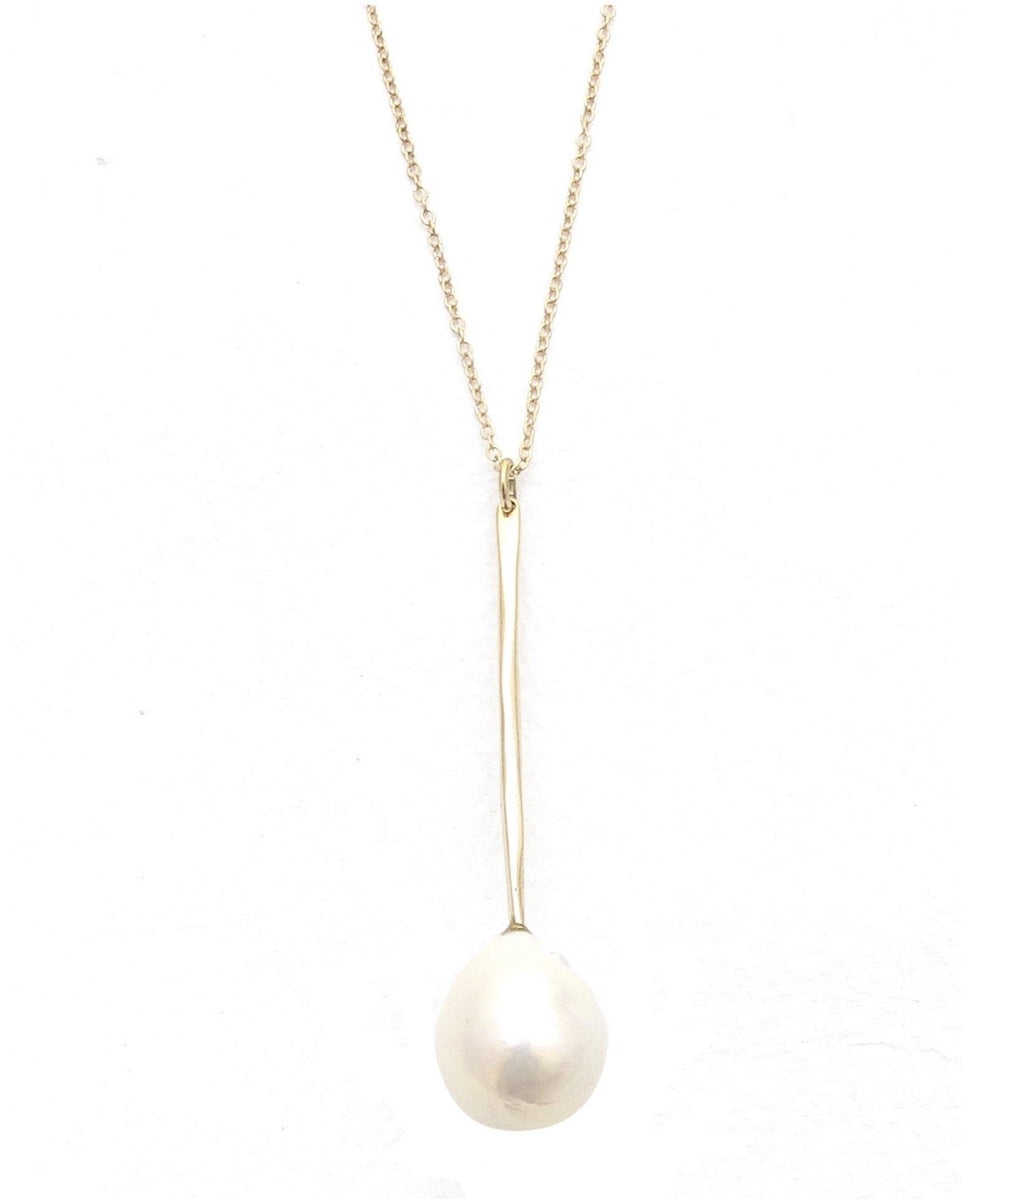 Wand pearl pendant necklace